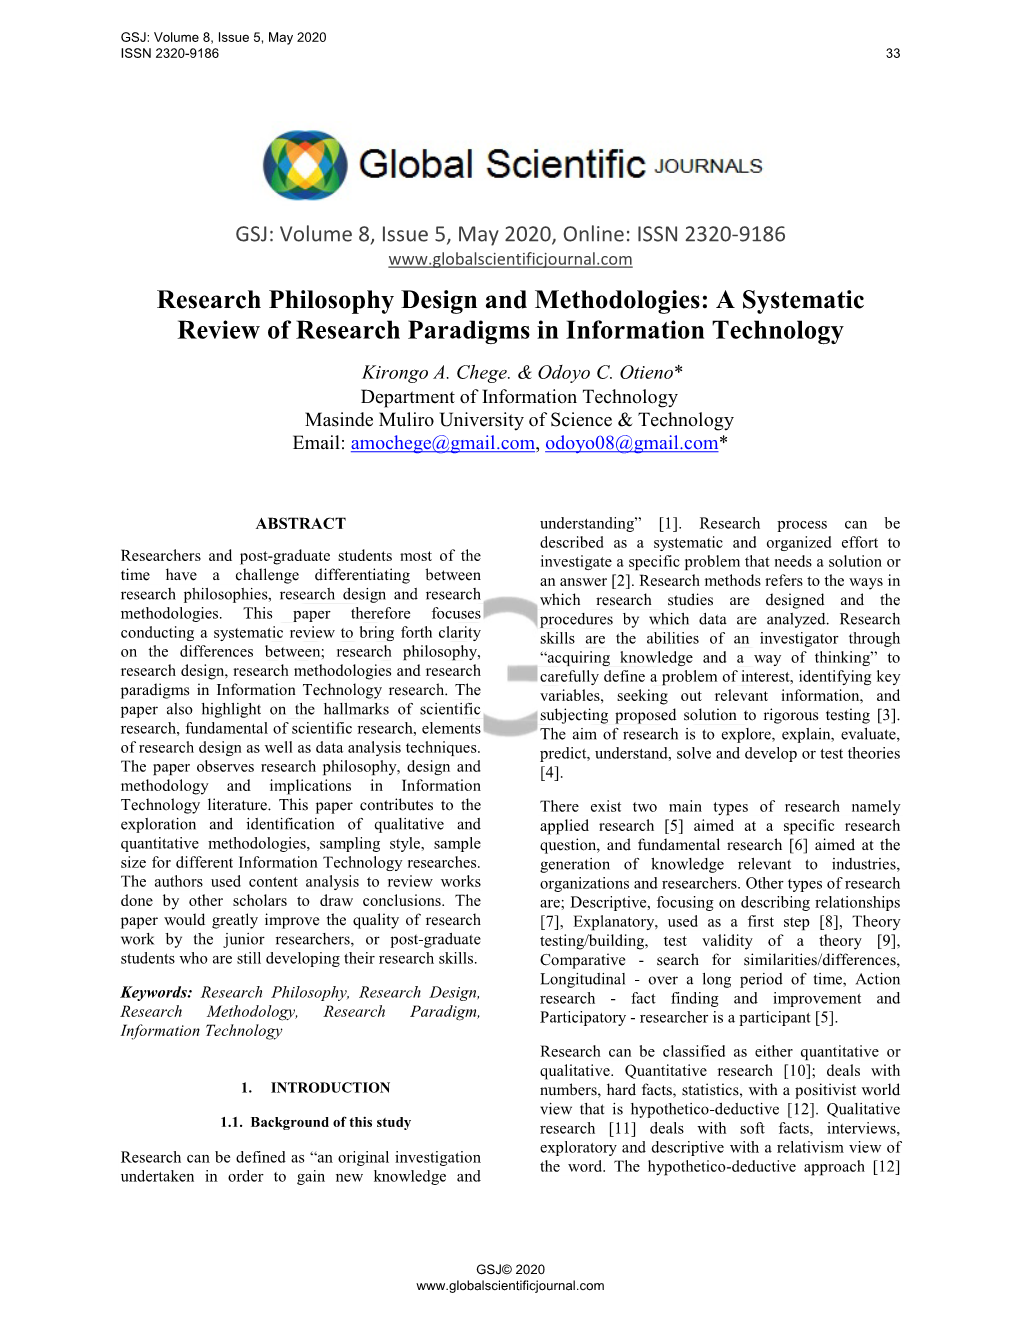 Research Philosophy Design and Methodologies: a Systematic Review of Research Paradigms in Information Technology Kirongo A